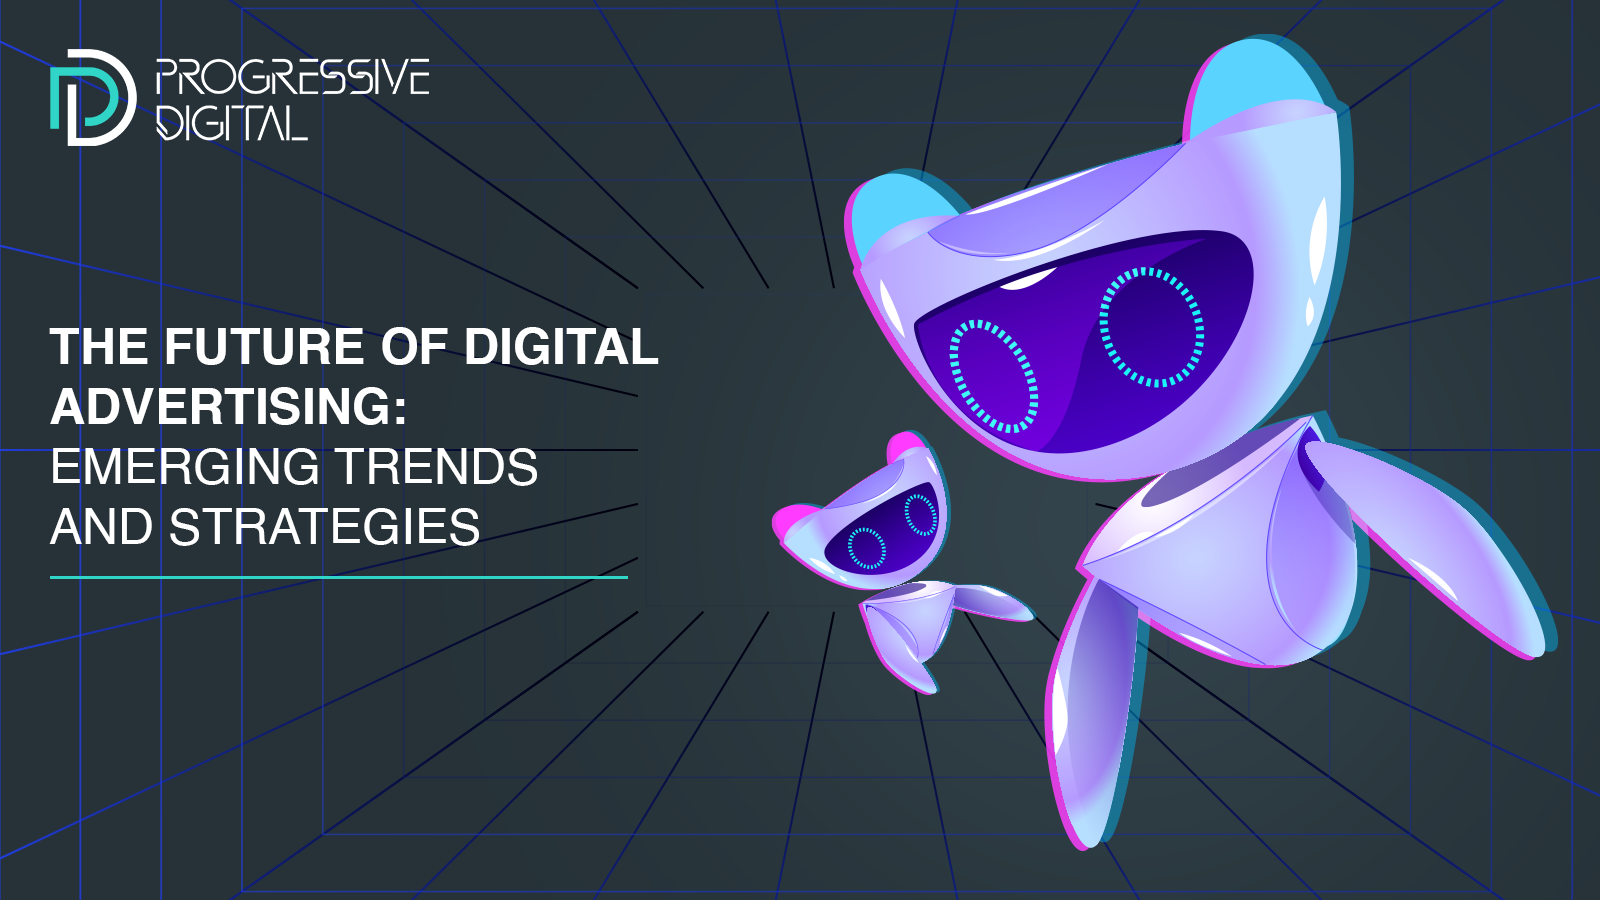 The Future of Digital Advertising: Emerging Trends and Strategies